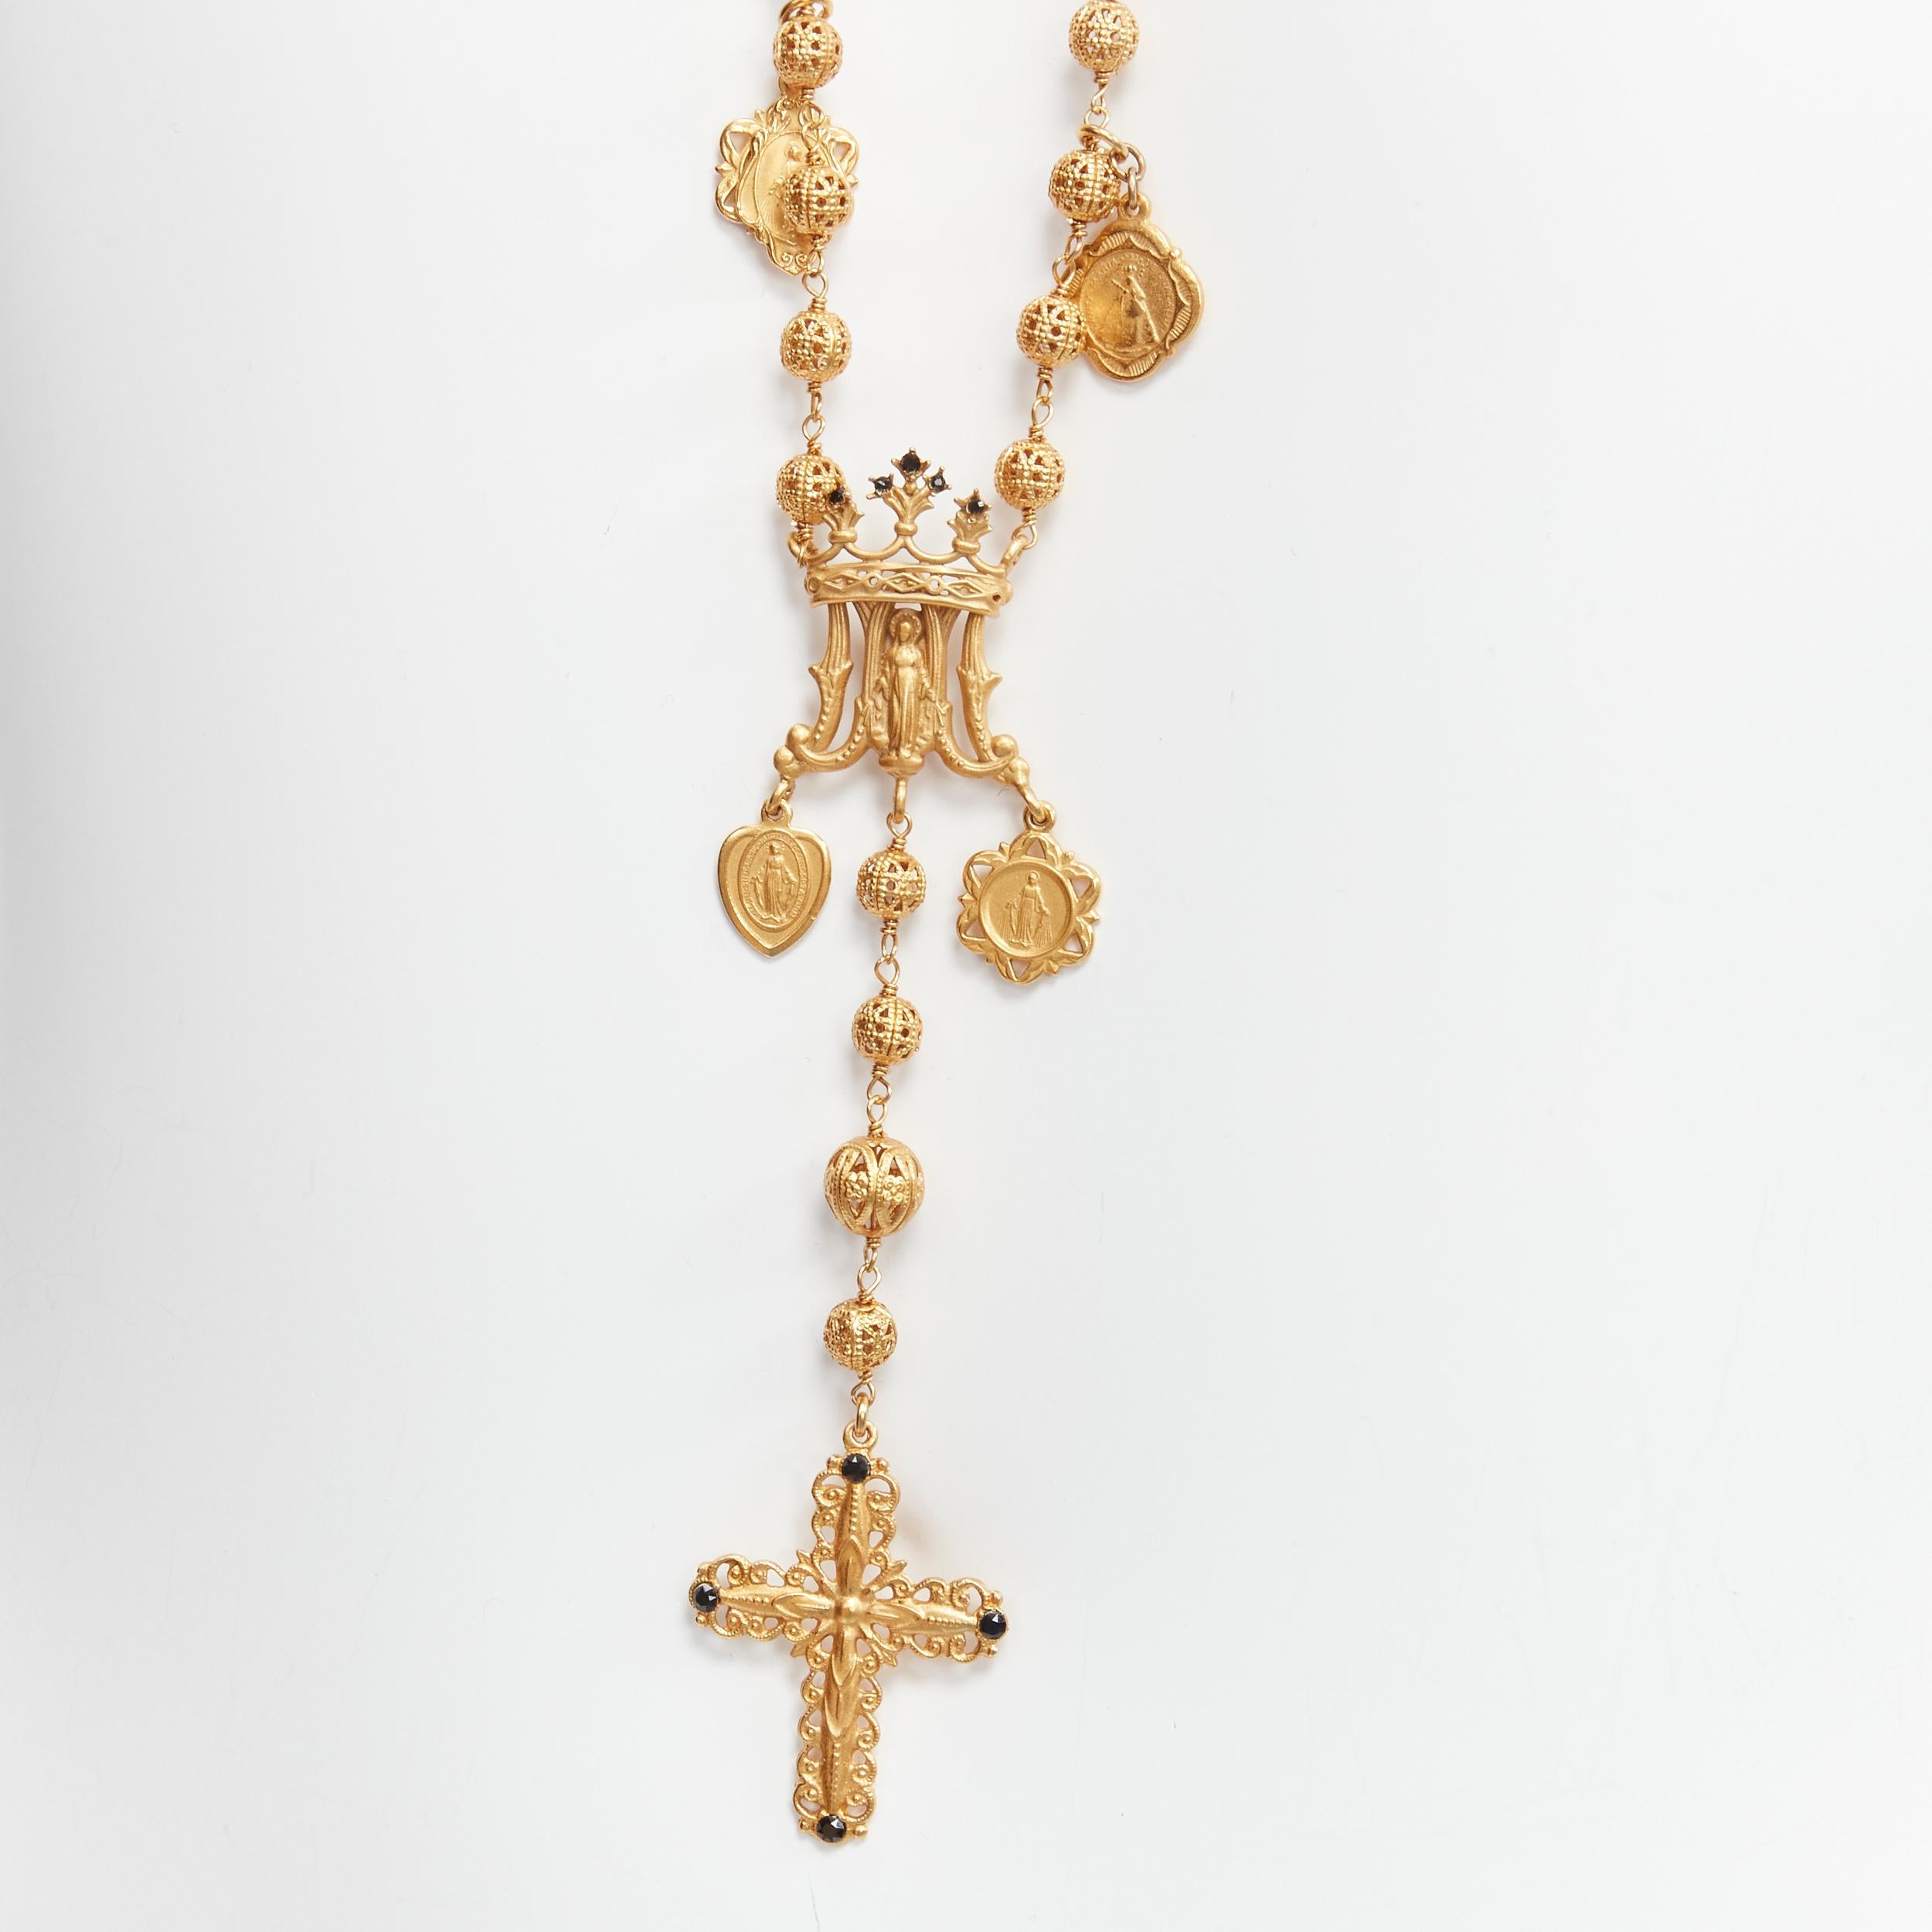 rare DOLCE GABBANA gold tone Jesus cross Saints coin charm long rosary necklace
Reference: TGAS/D00183
Brand: Dolce Gabbana
Designer: Domenico Dolce and Stefano Gabbana
Material: Metal
Color: Gold
Pattern: Barocco
Closure: Pull On
Made in: